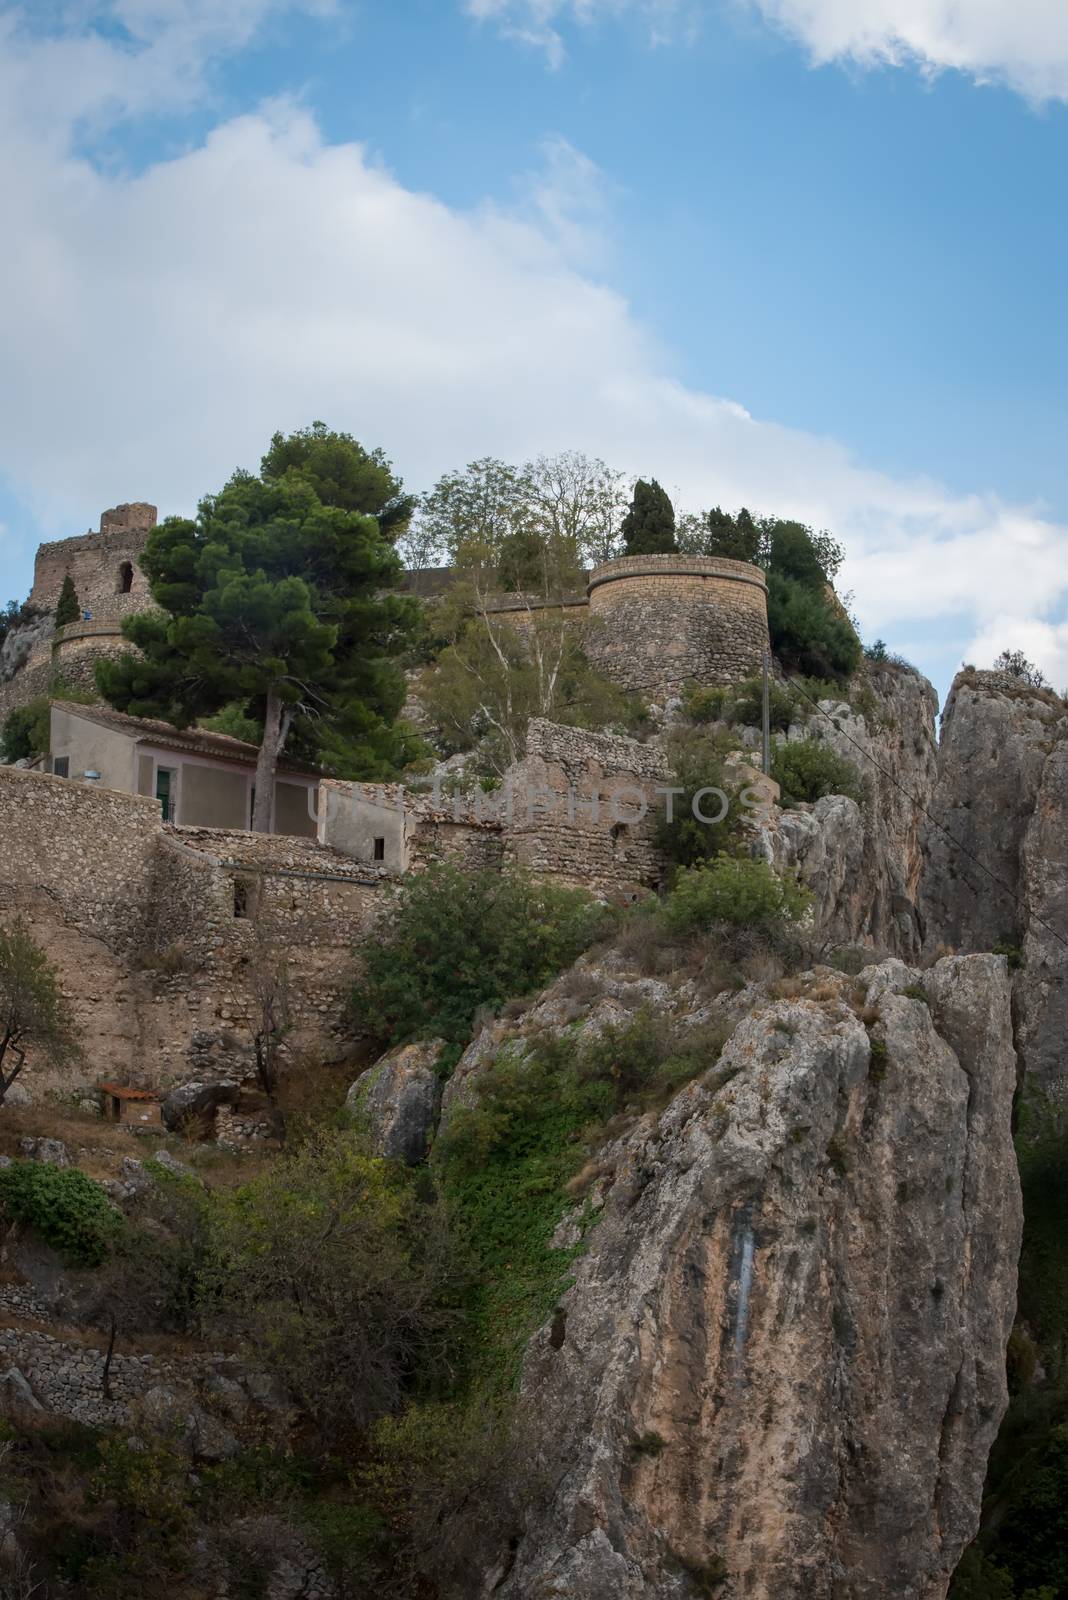 View of the small Village and castle  . Spain . by LarisaP